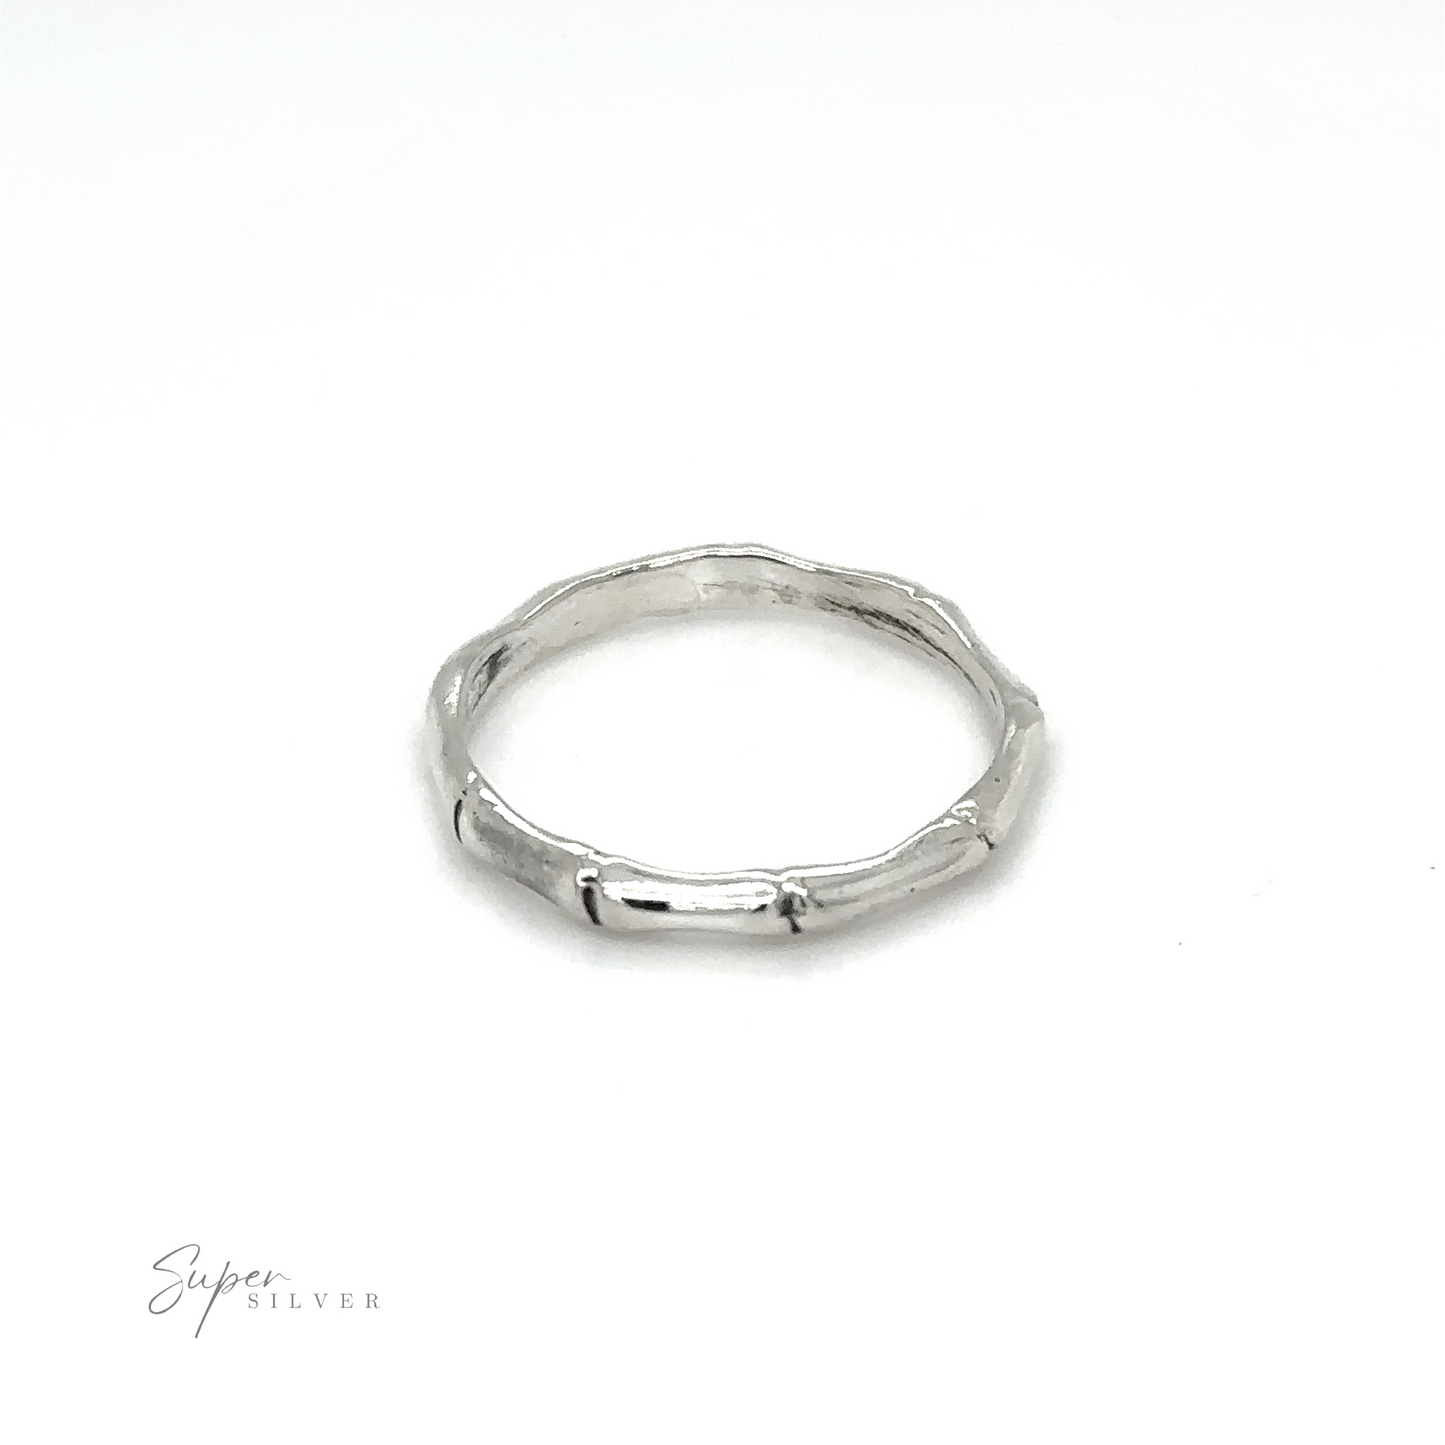 A Super Silver Bamboo Band Silver Ring with a bamboo design.